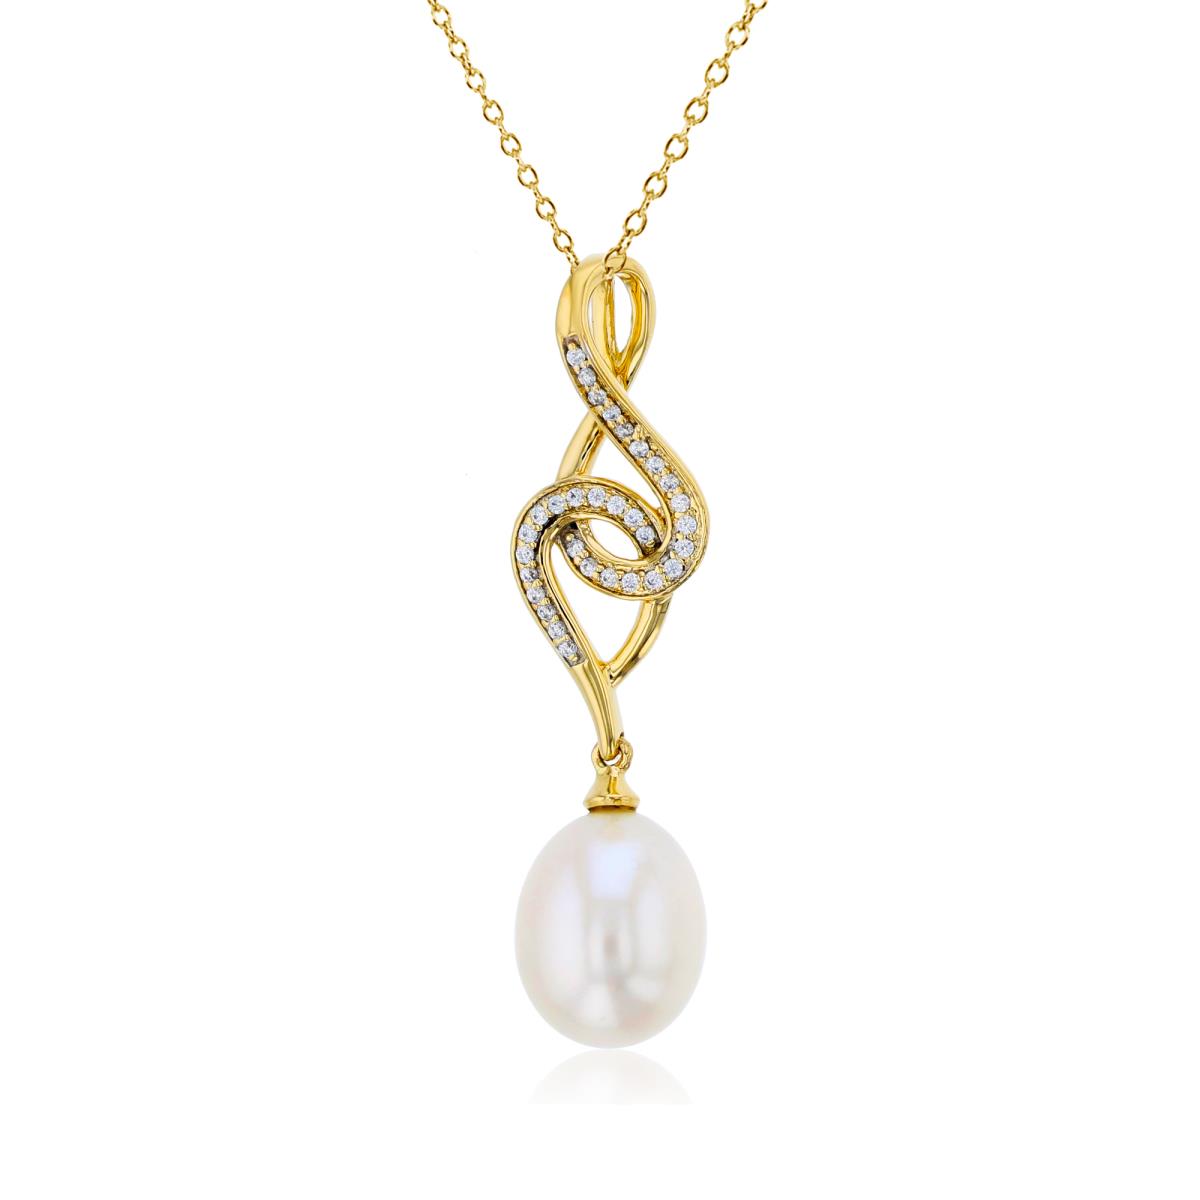 10K Yellow Gold 0.12 CTTW Rnd Diam & 11X9 mm TD White Pearl Drop Dangling 18"Necklace